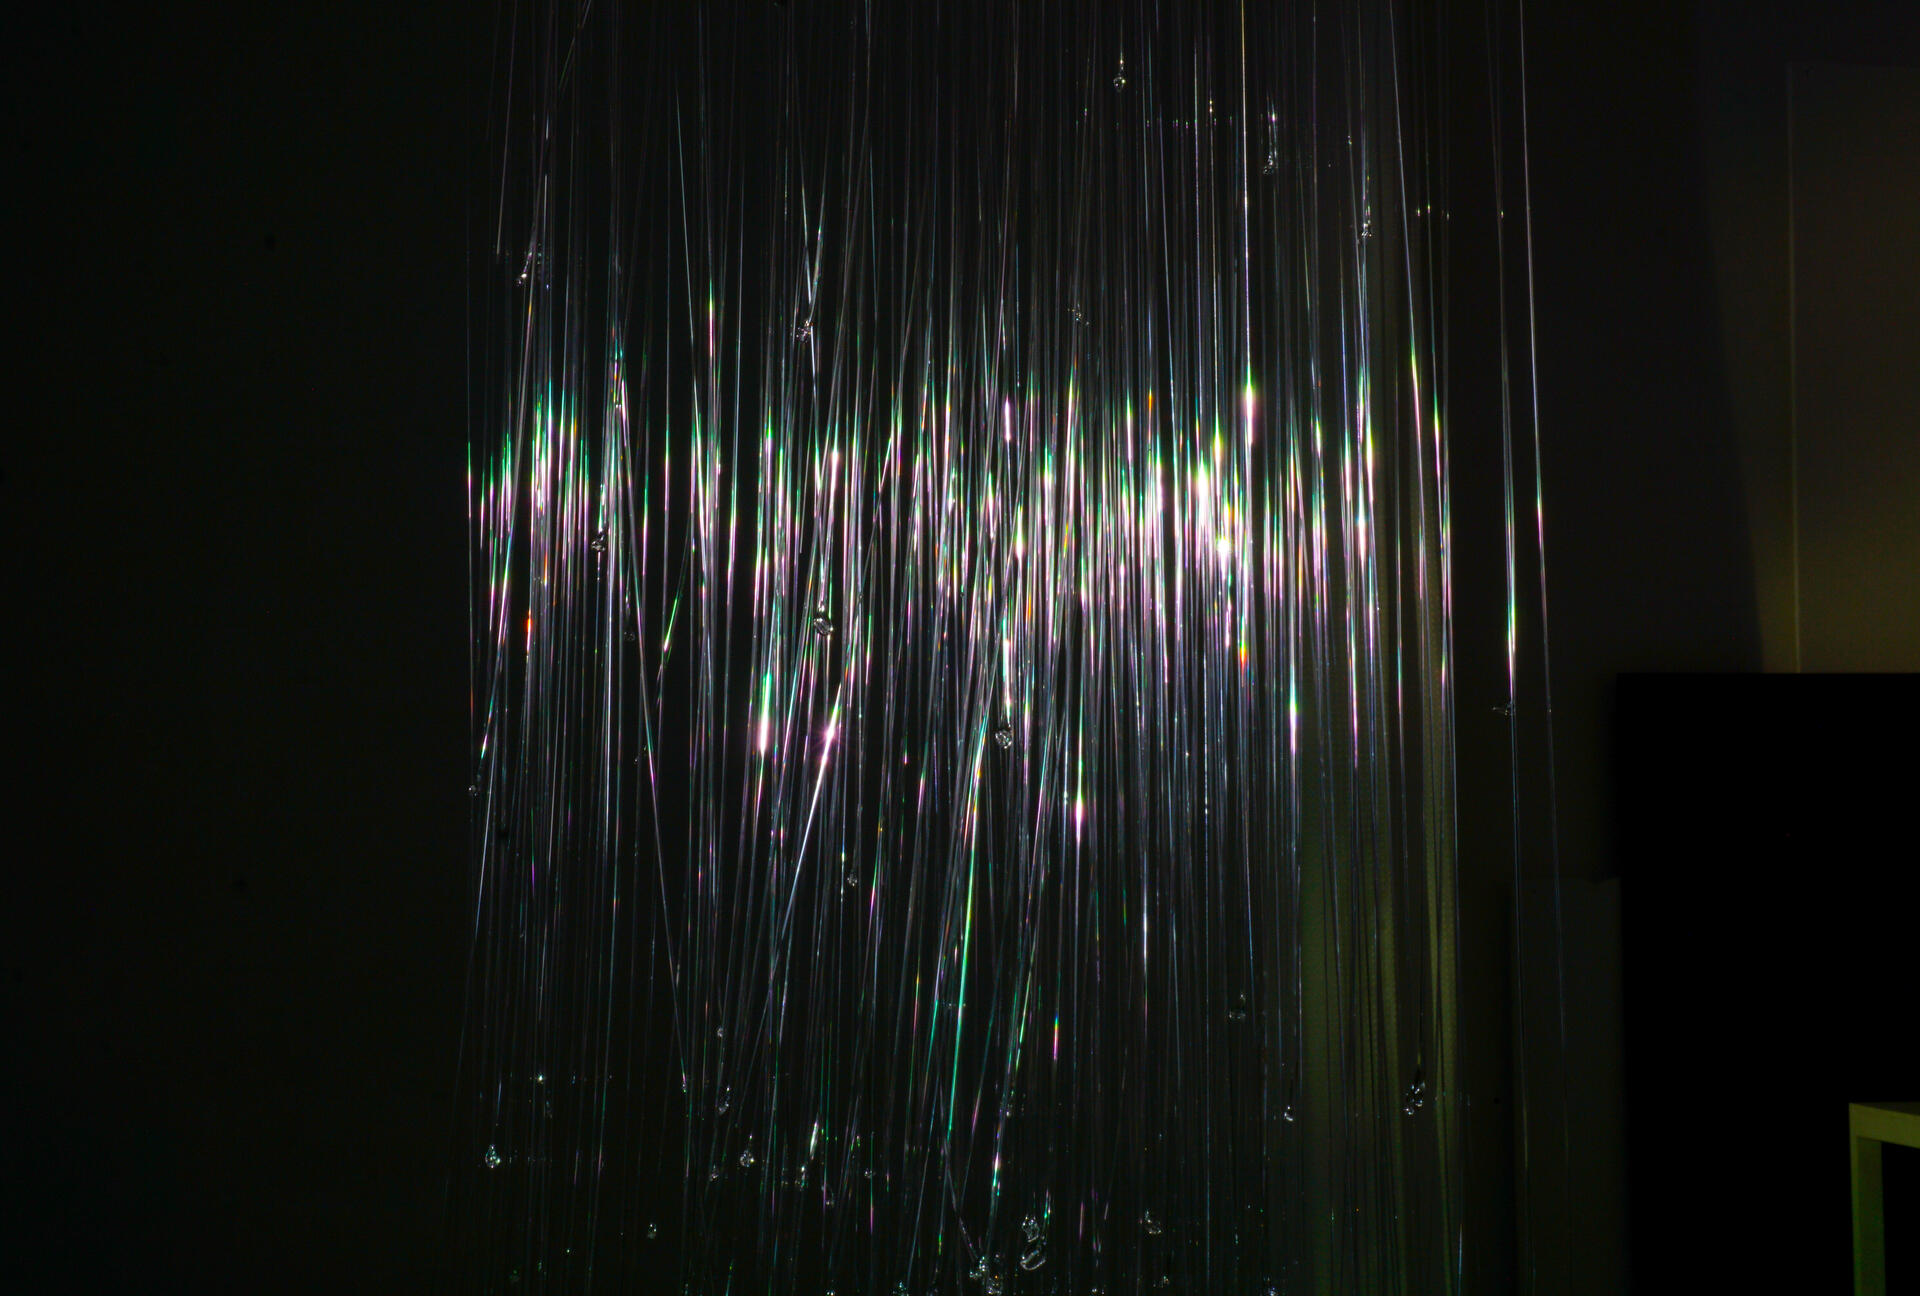 Hundreds of glass fibers suspended in the room, with iridescent light reflected on the surface